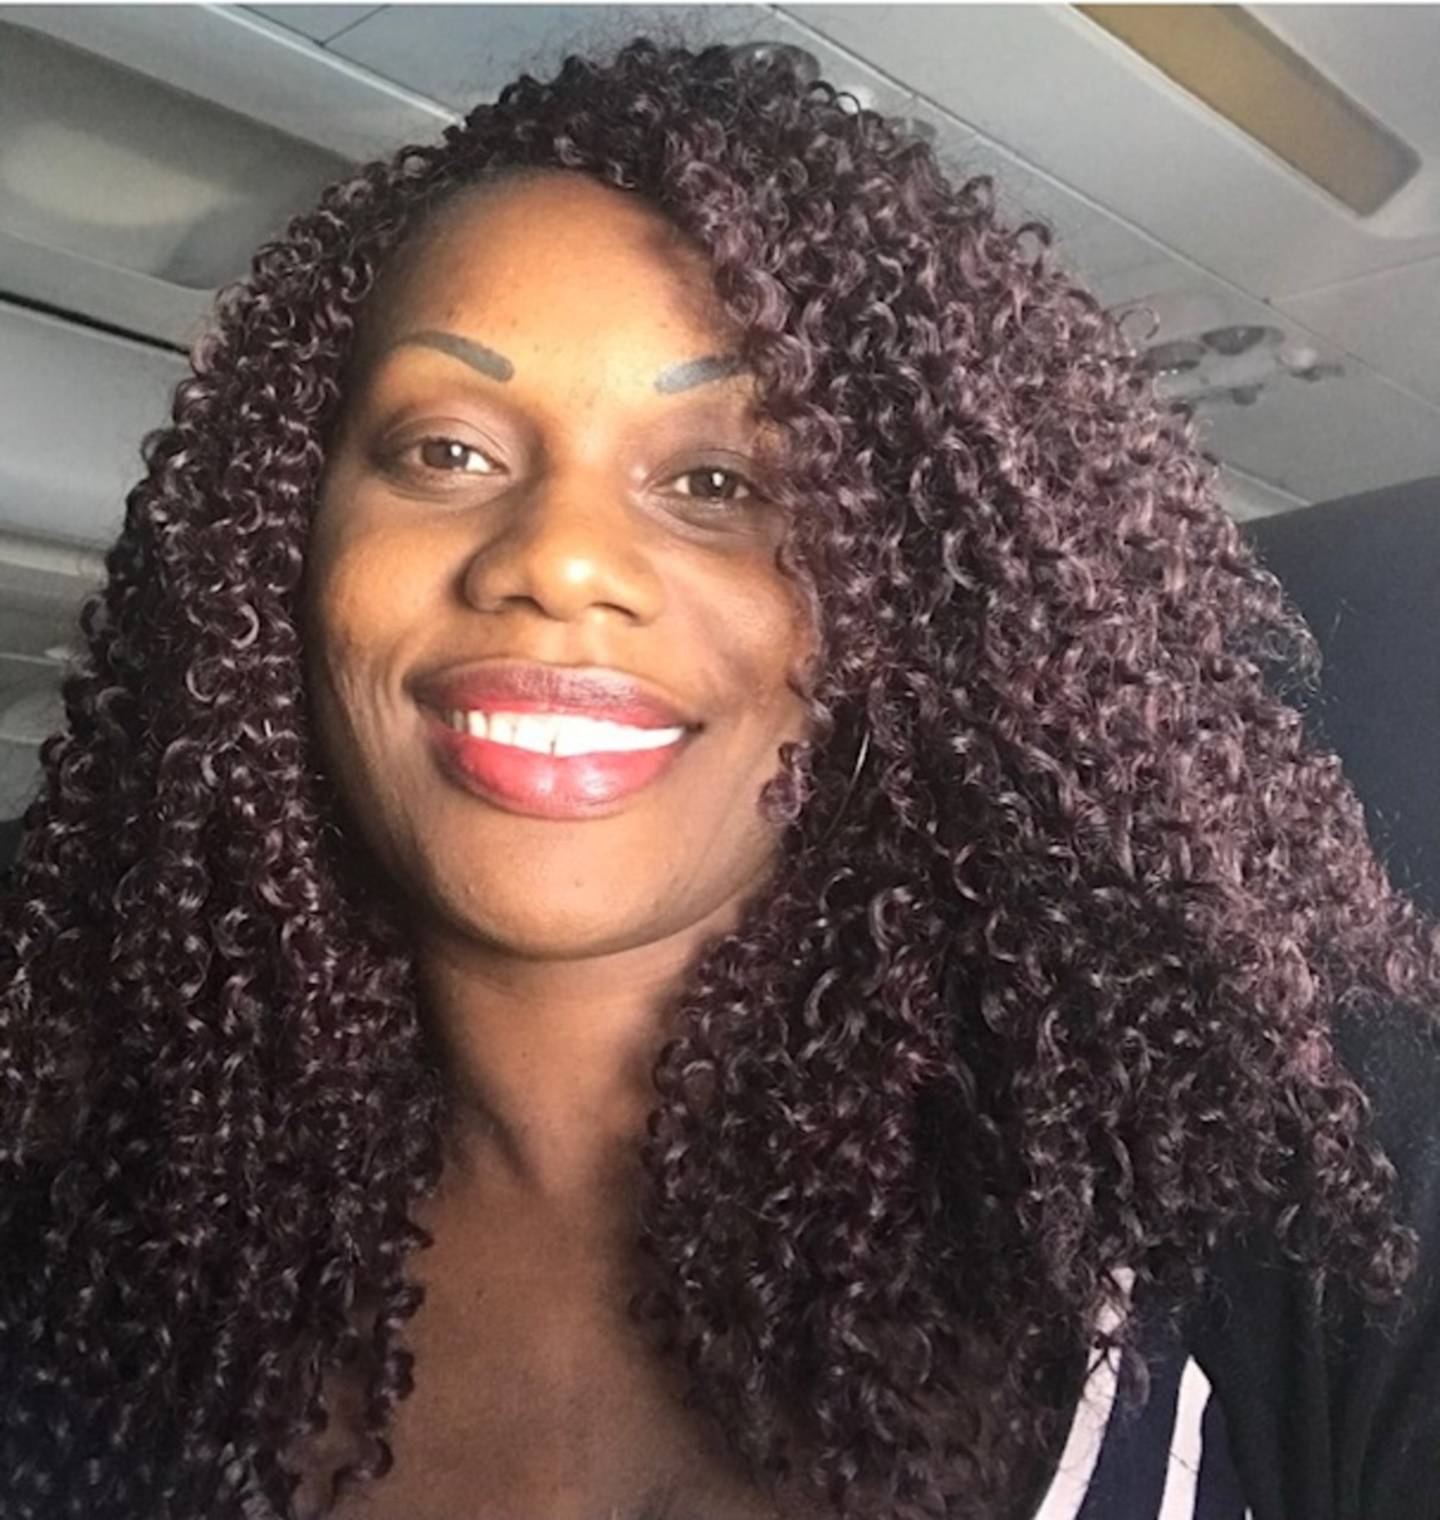 Texas resident Brenda Gentry quit her job as a mortgage underwriter to pursue a full-time career in cryptocurrency trading. Photo: Brenda Gentry